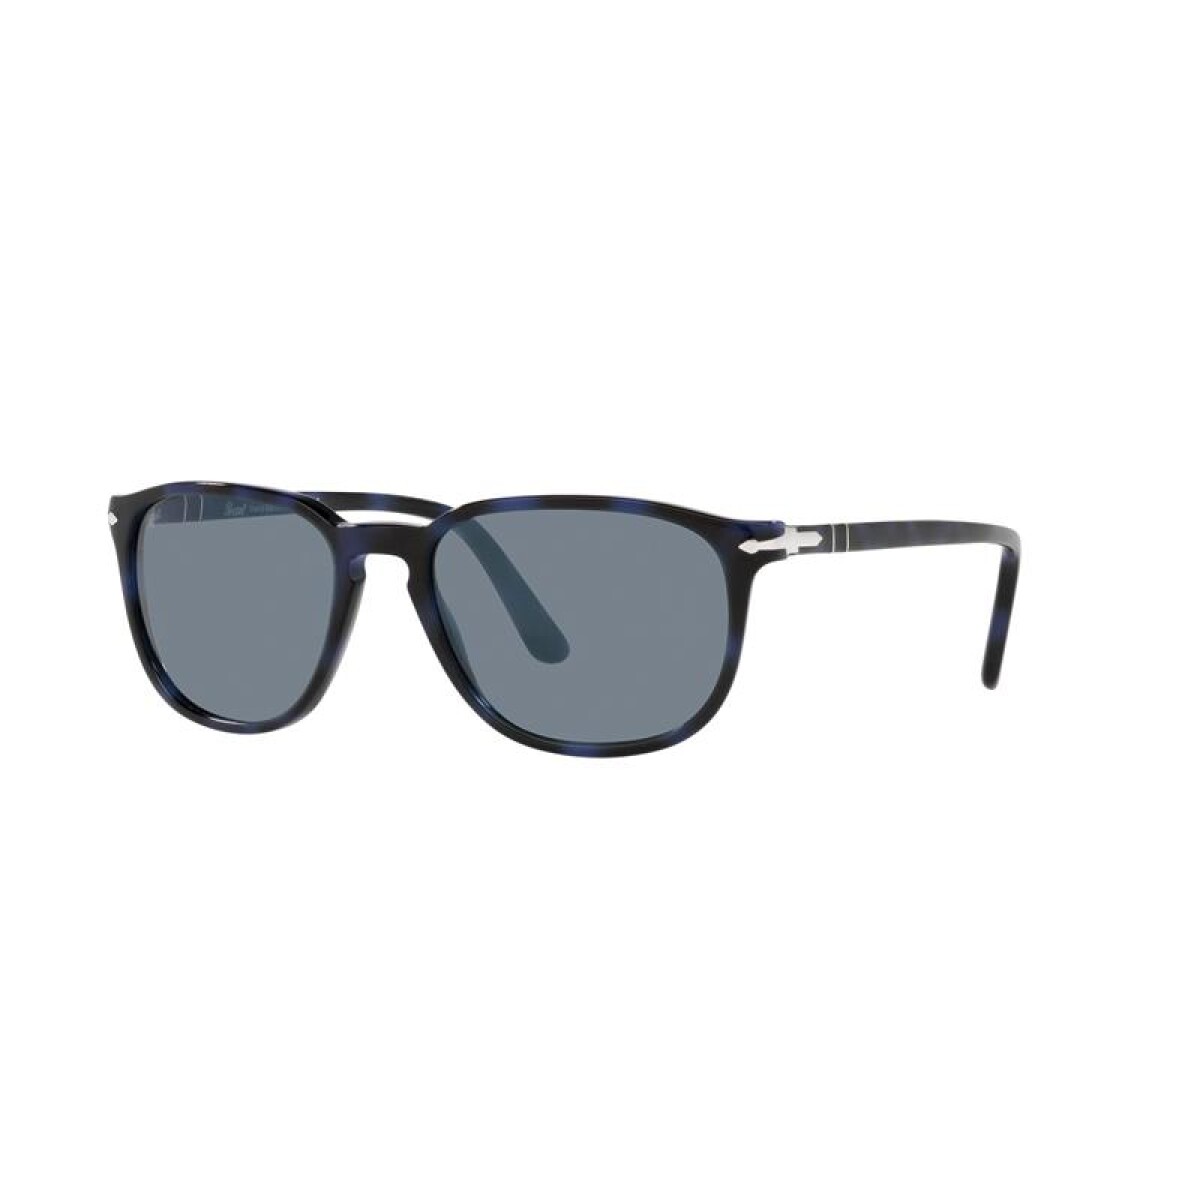 Persol 3019-s - 1099/56 